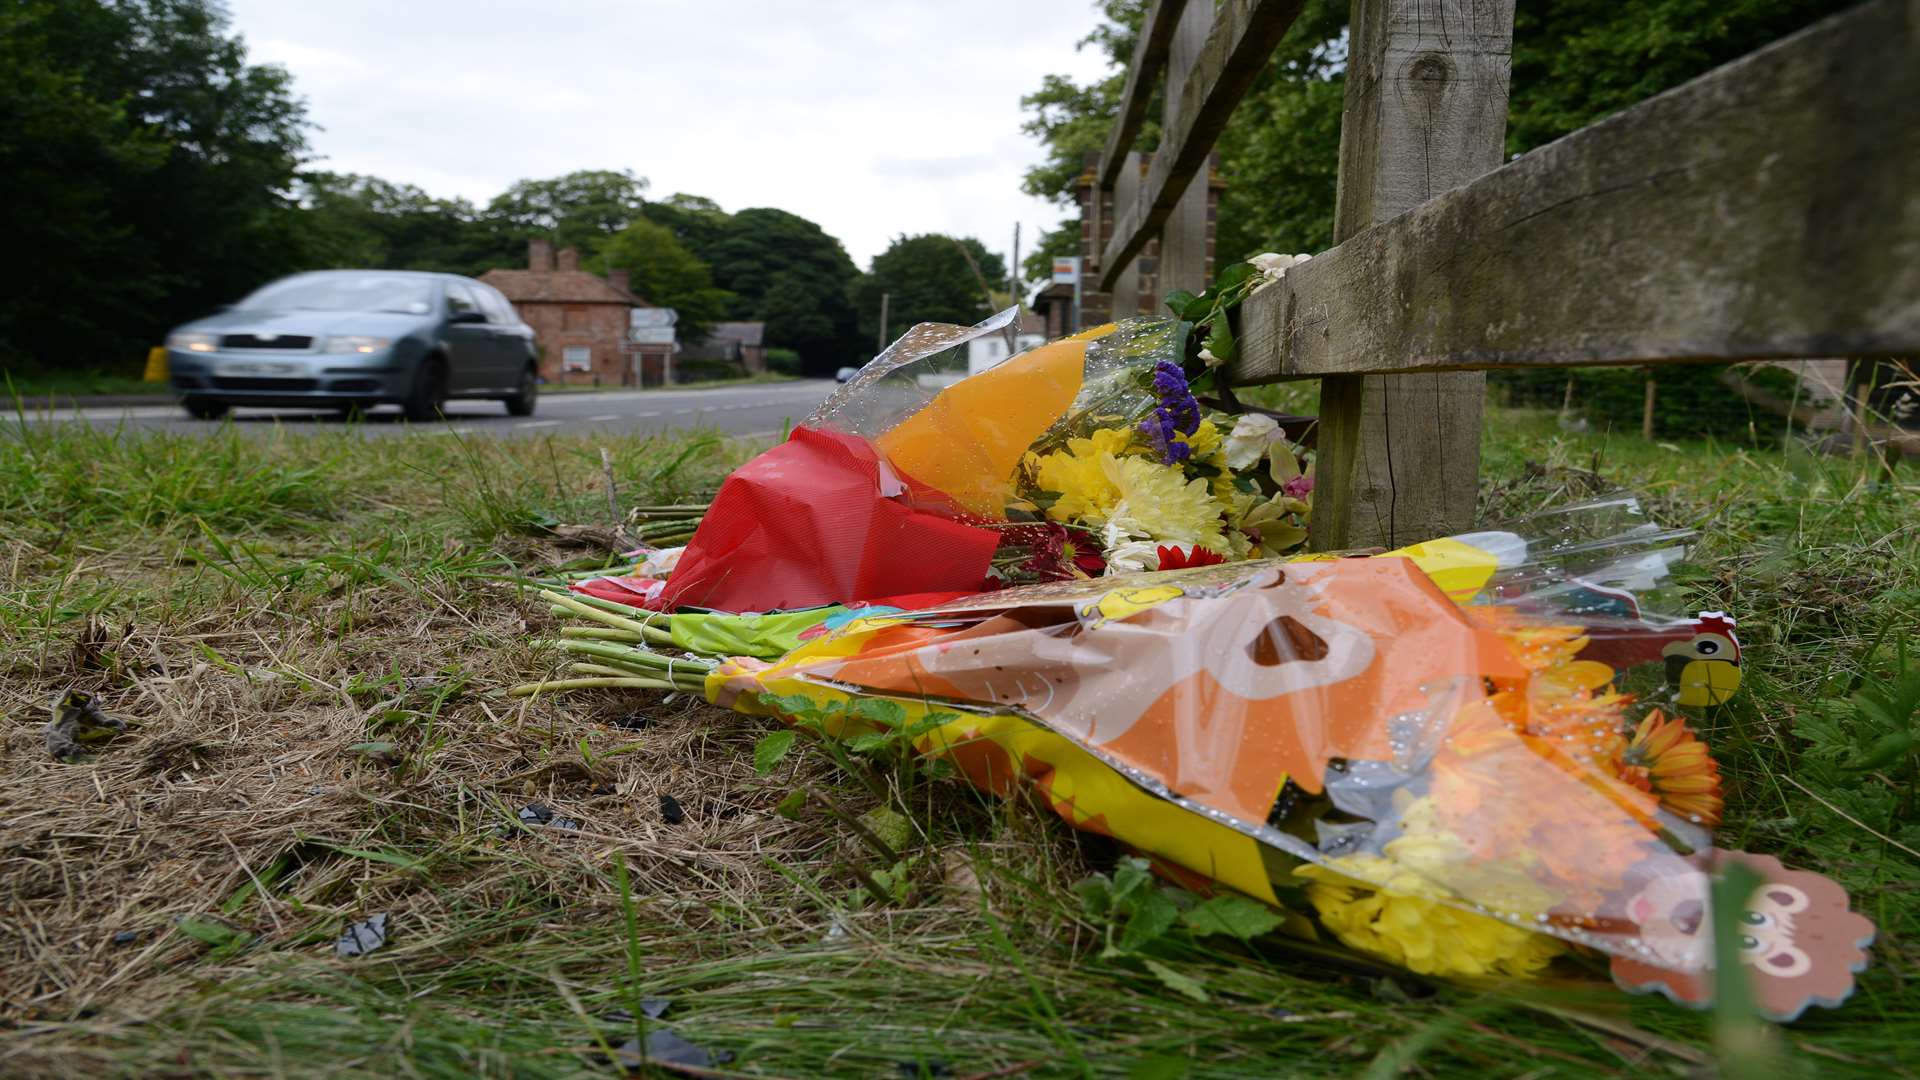 Flowers left at the scene of the crash